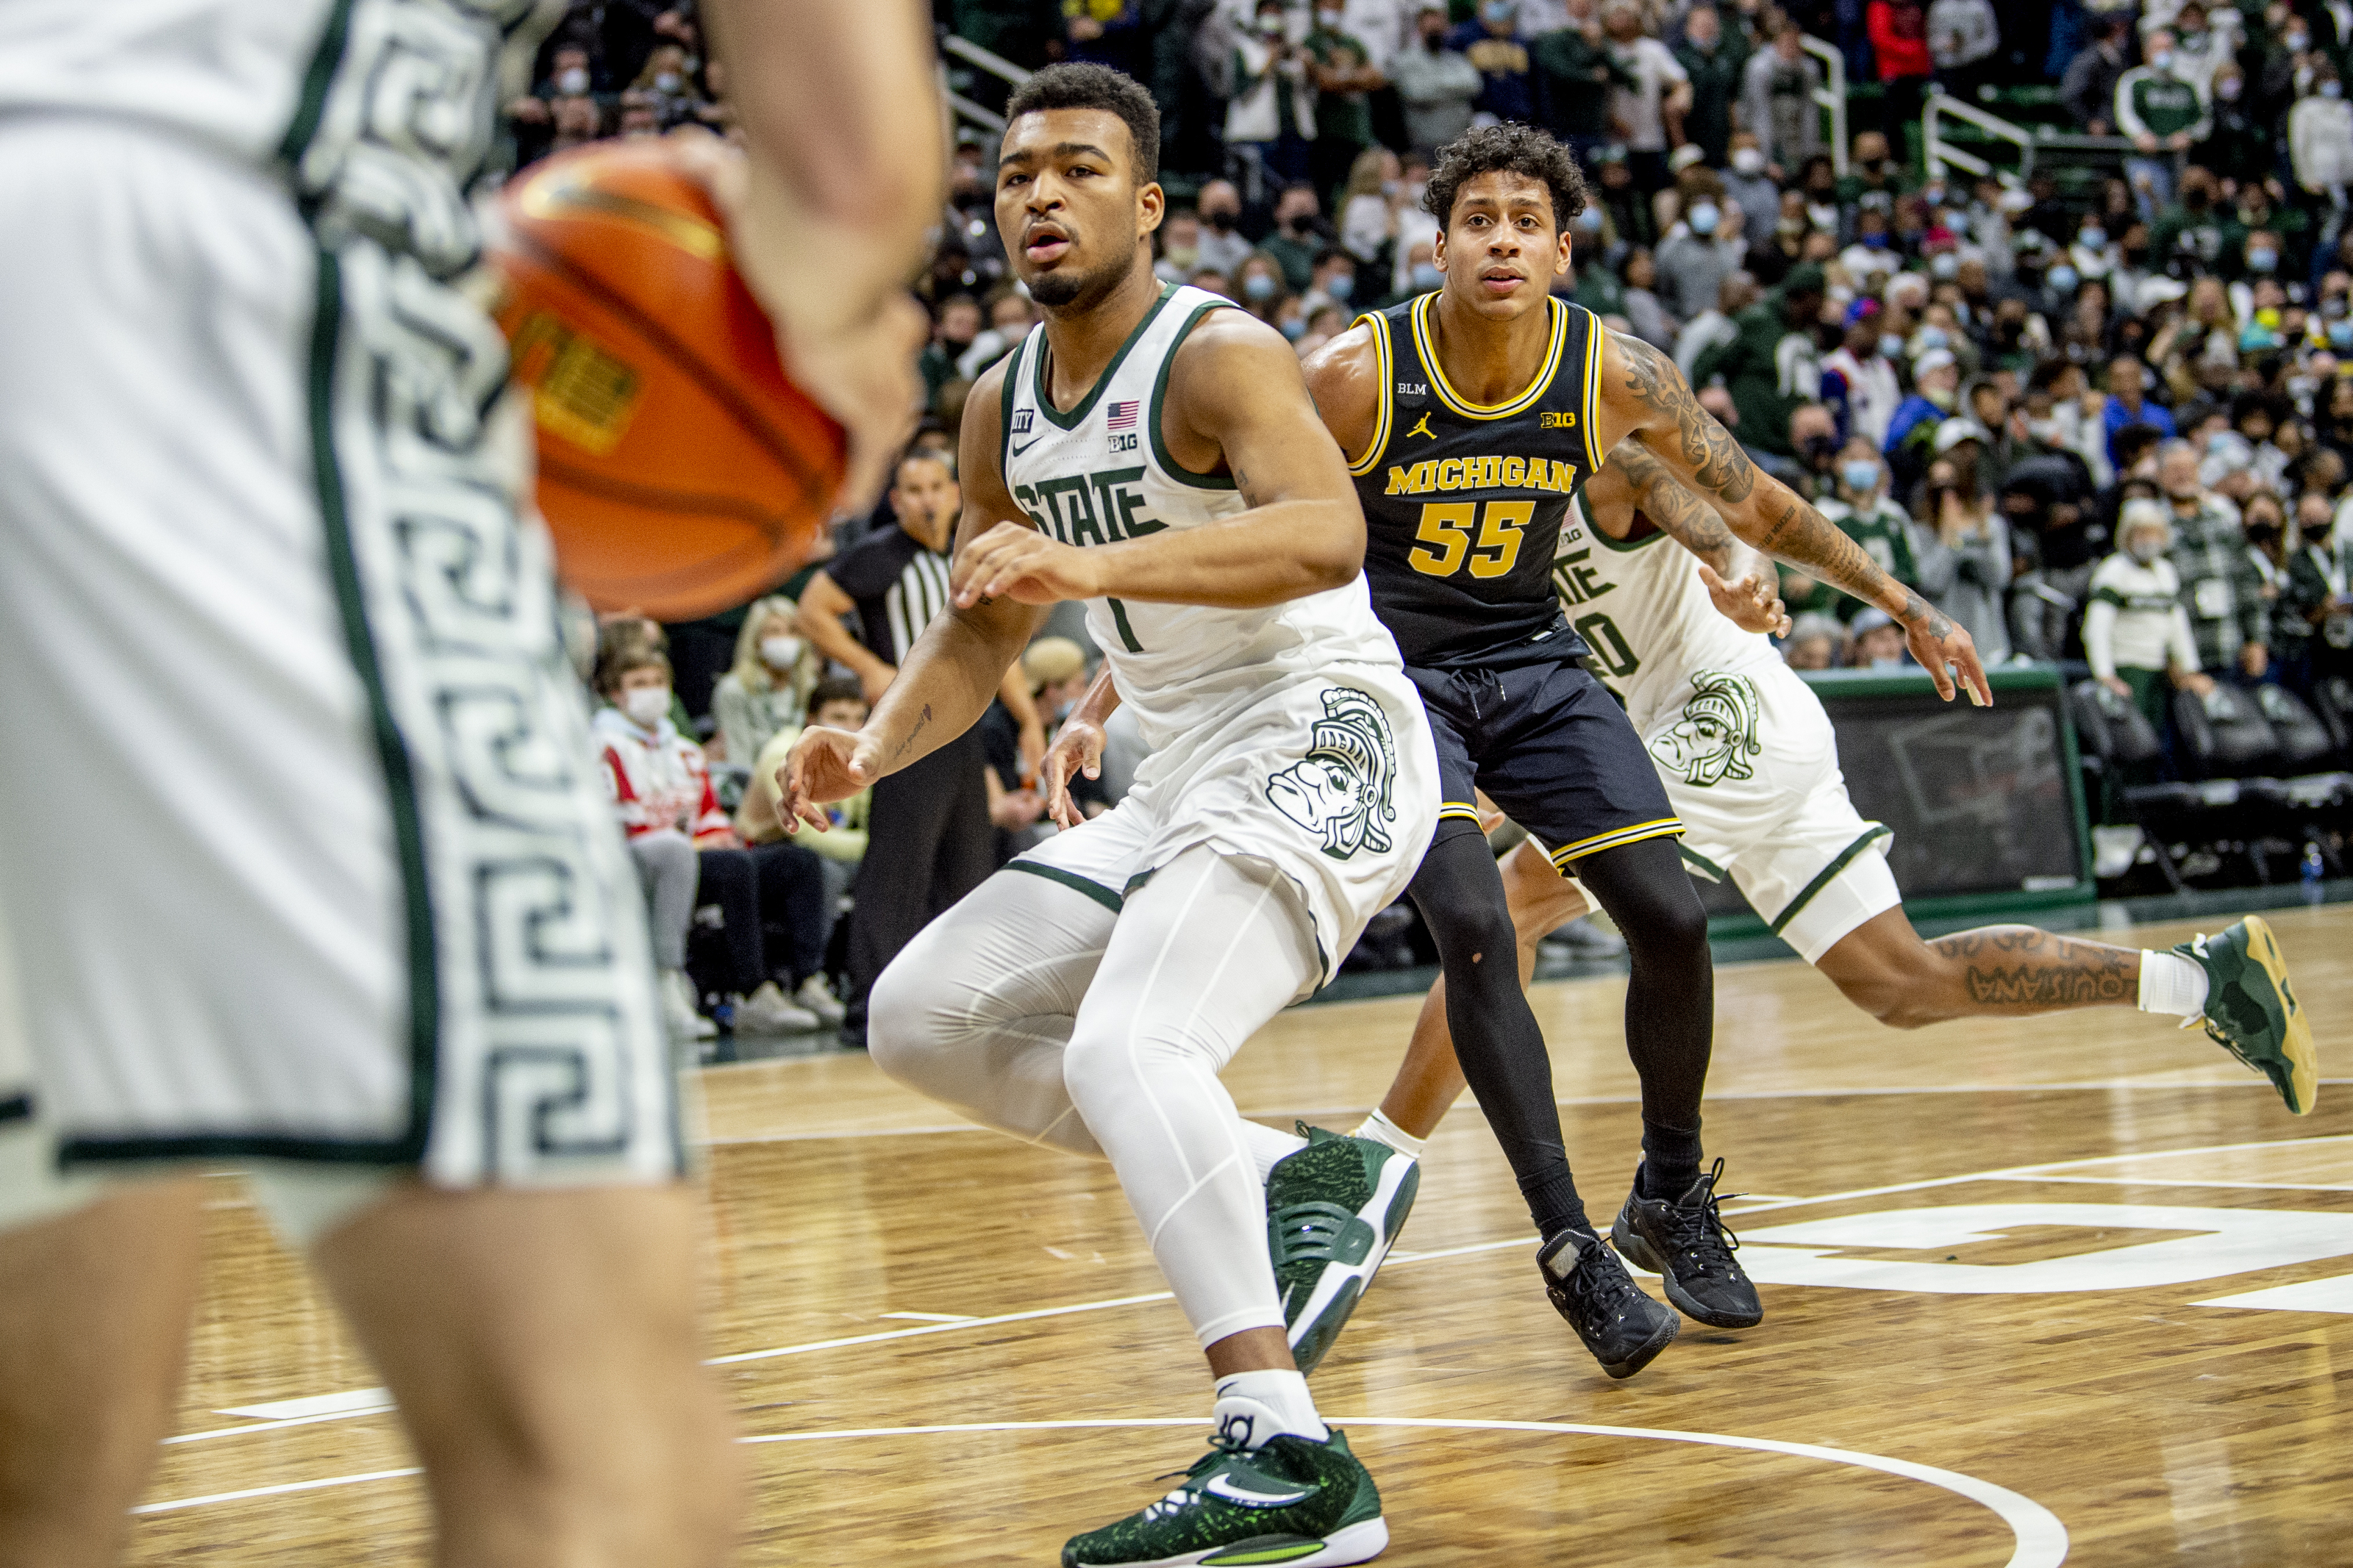 How did Michigan State Players do on the first night of Moneyball